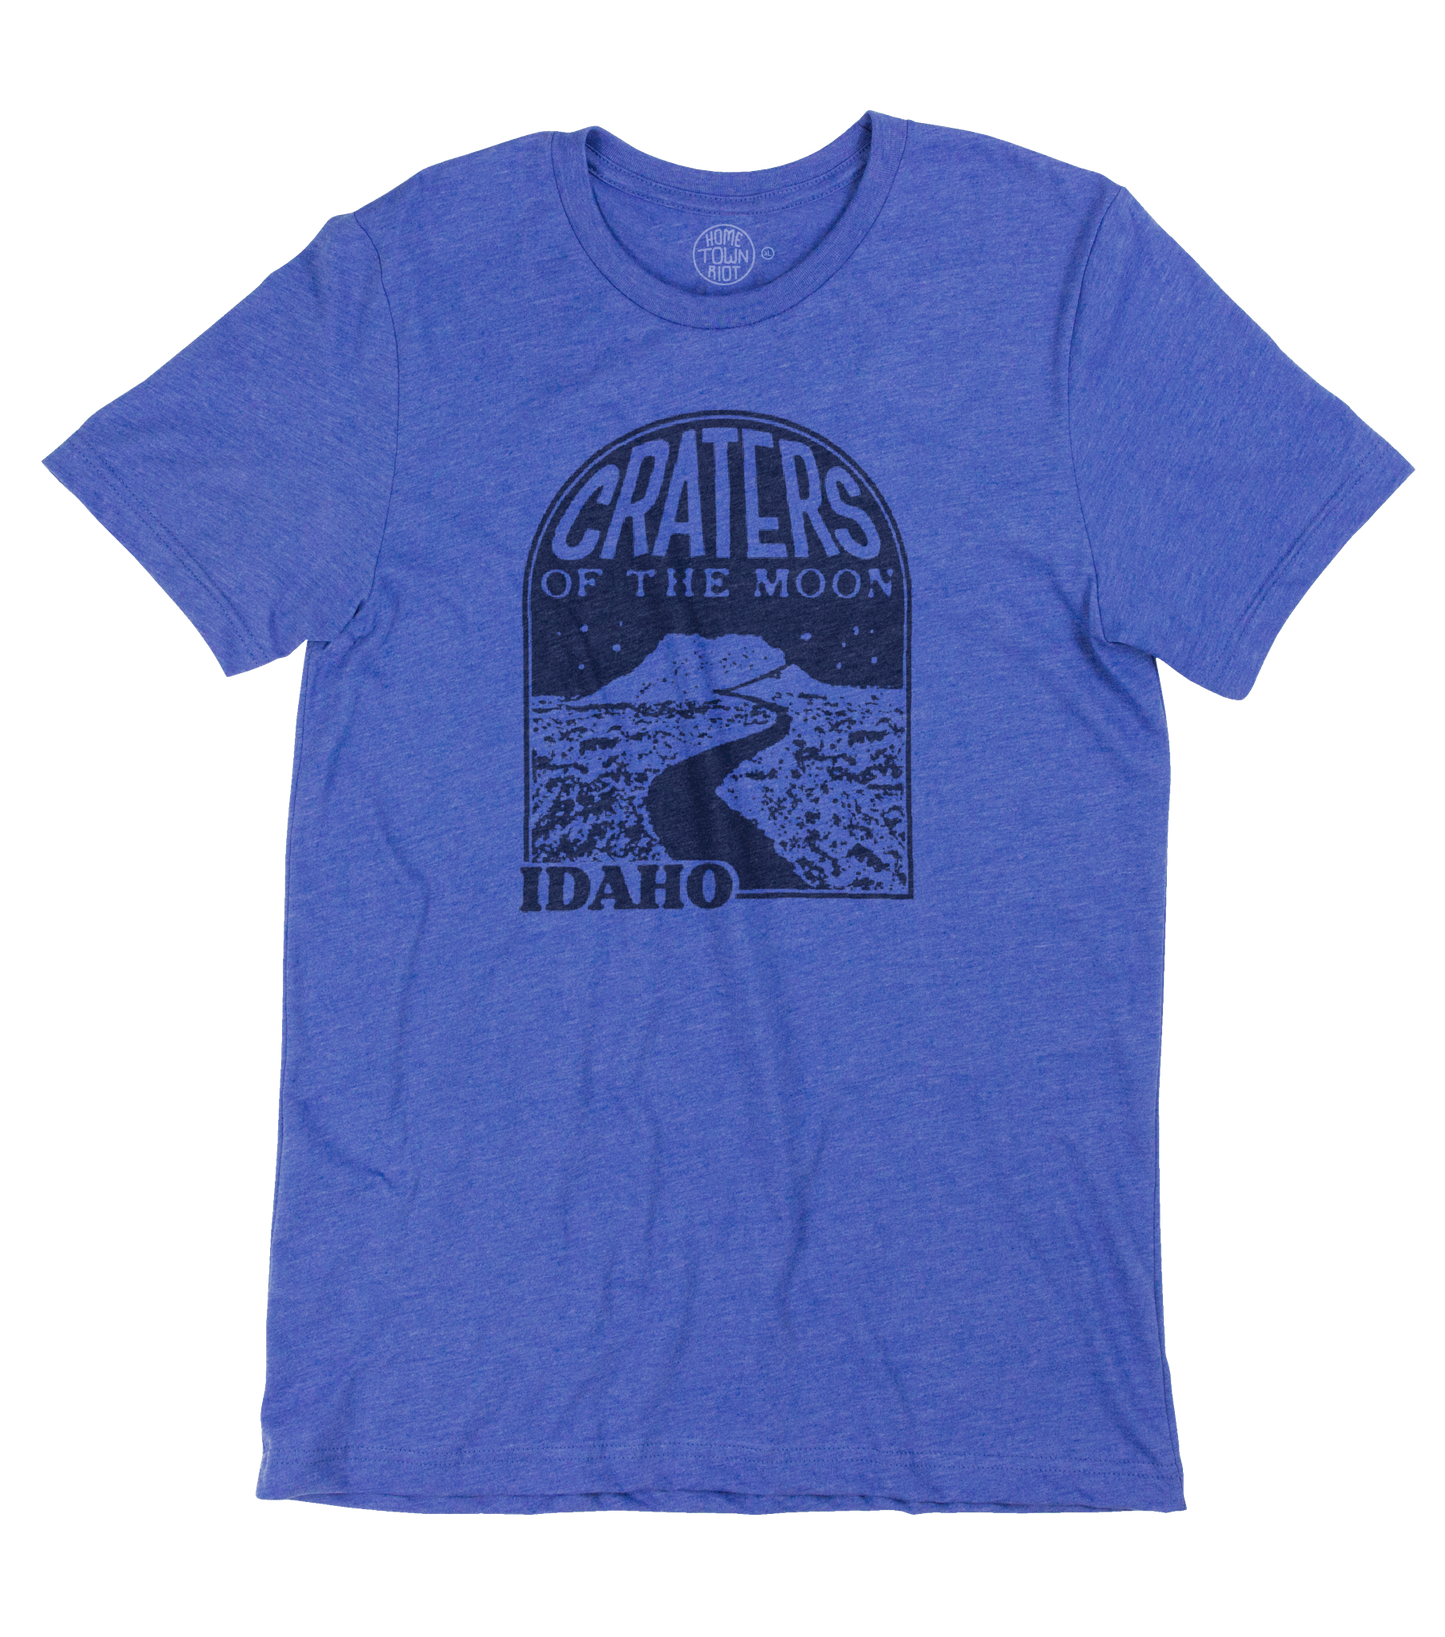 Craters of the Moon Idaho Shirt - HomeTownRiot